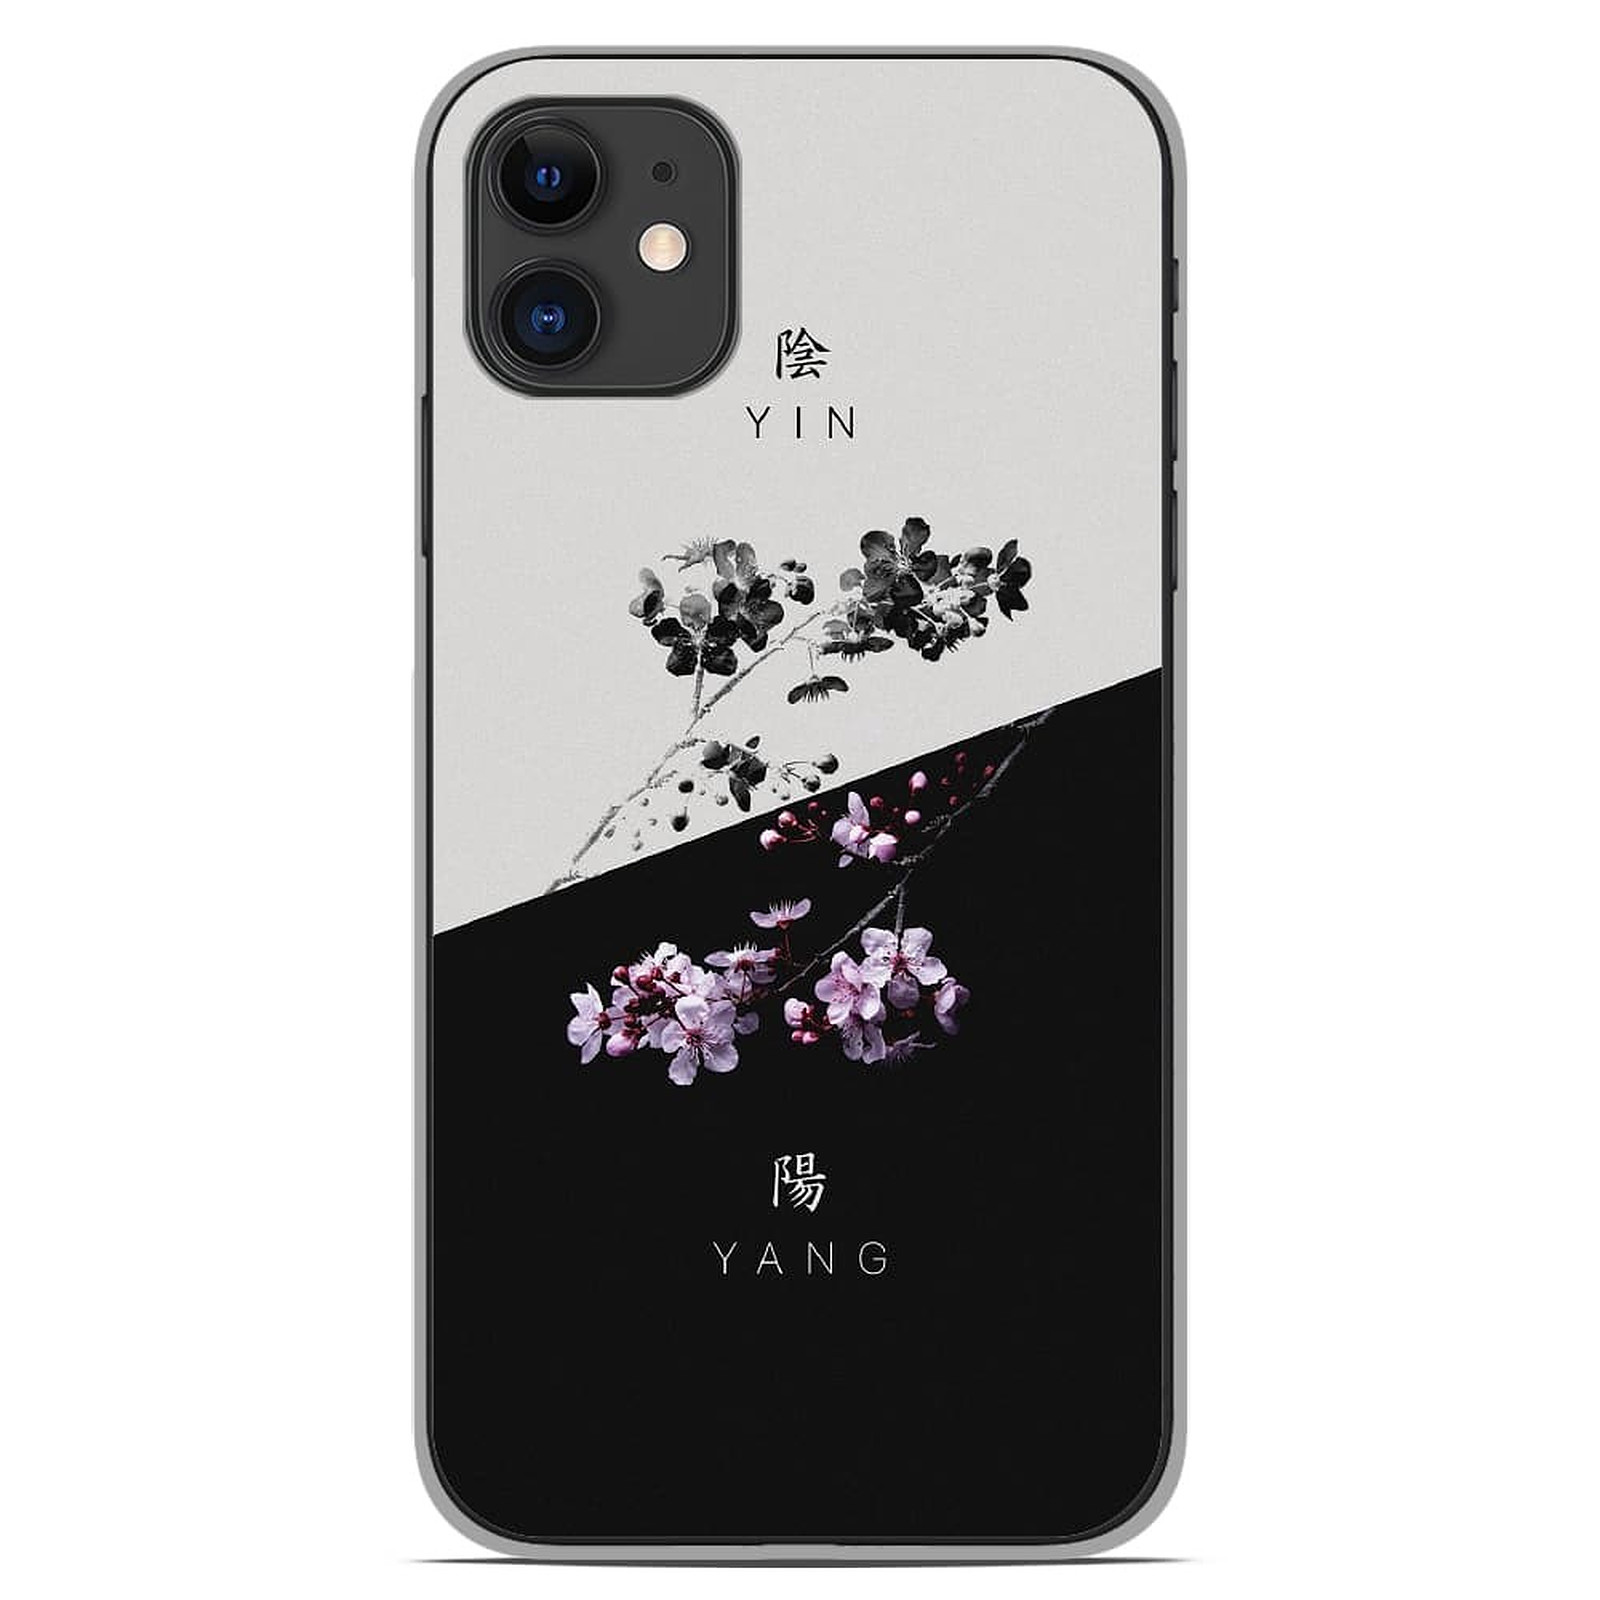 1001 Coques Coque silicone gel Apple iPhone 11 motif Yin et Yang - Coque telephone 1001Coques